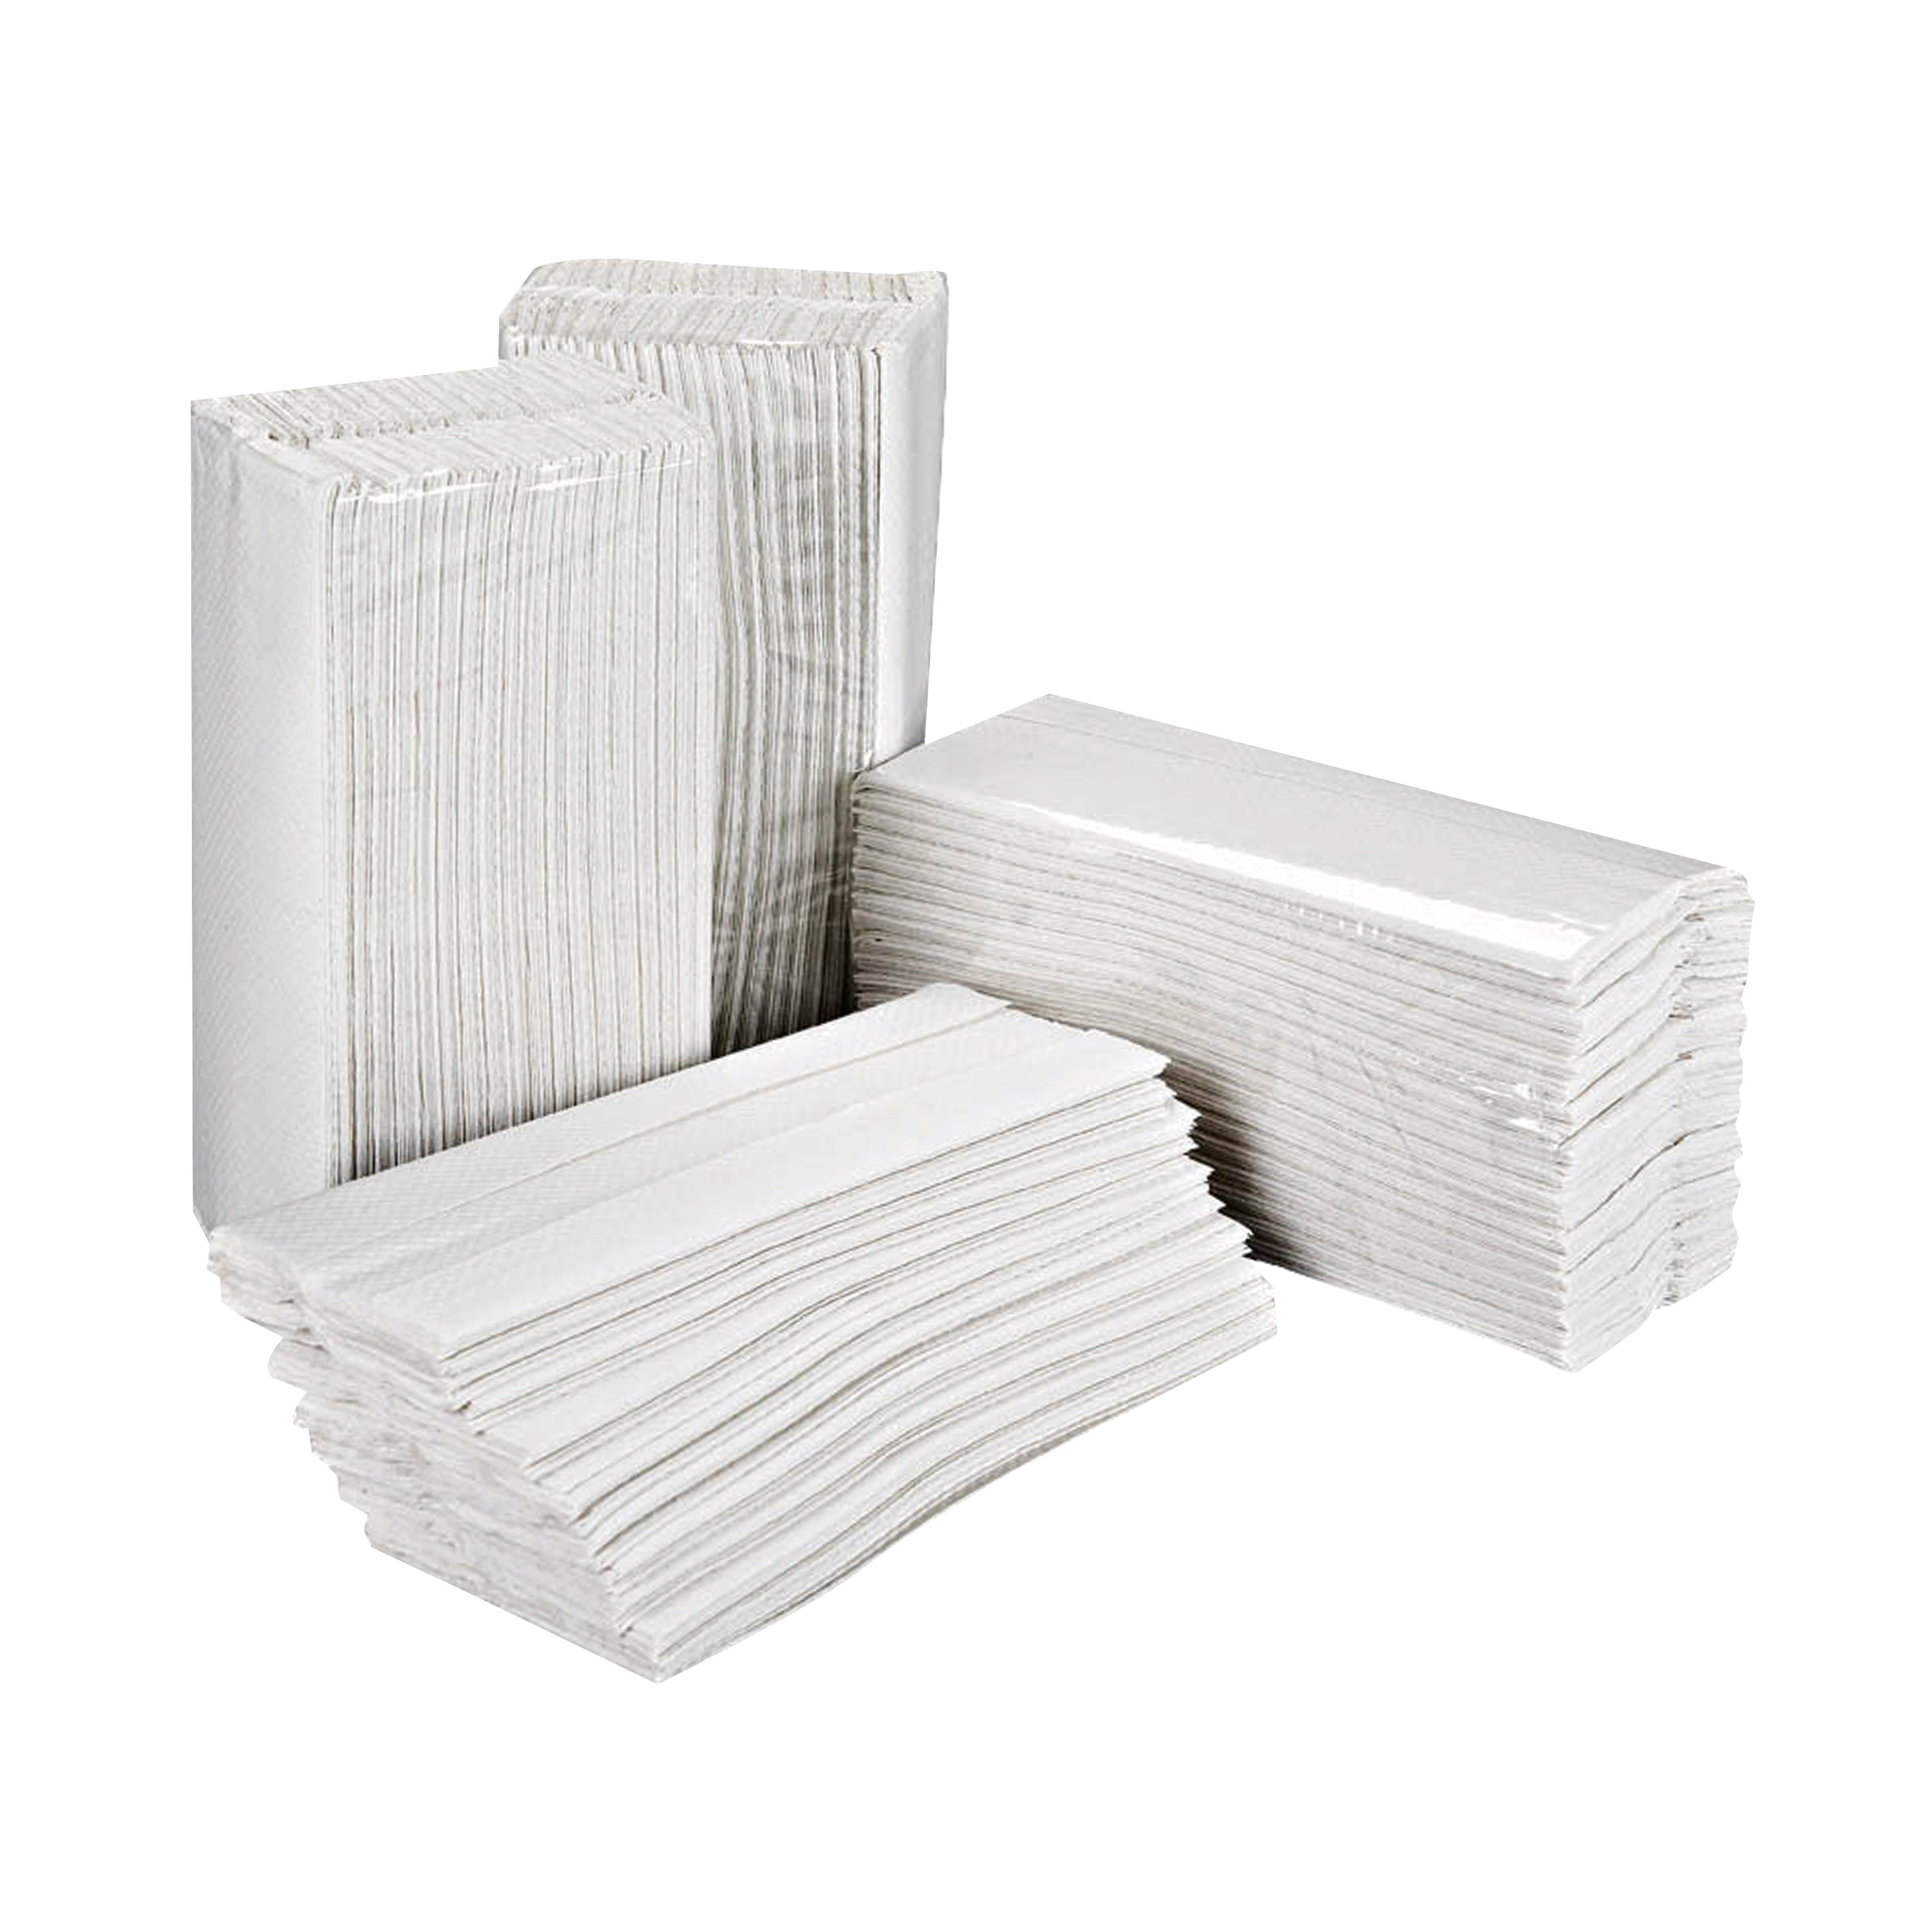 2Work Hand Towel C-Fold 2-Ply White 217x310mm (Pack of 2295) 2W70063